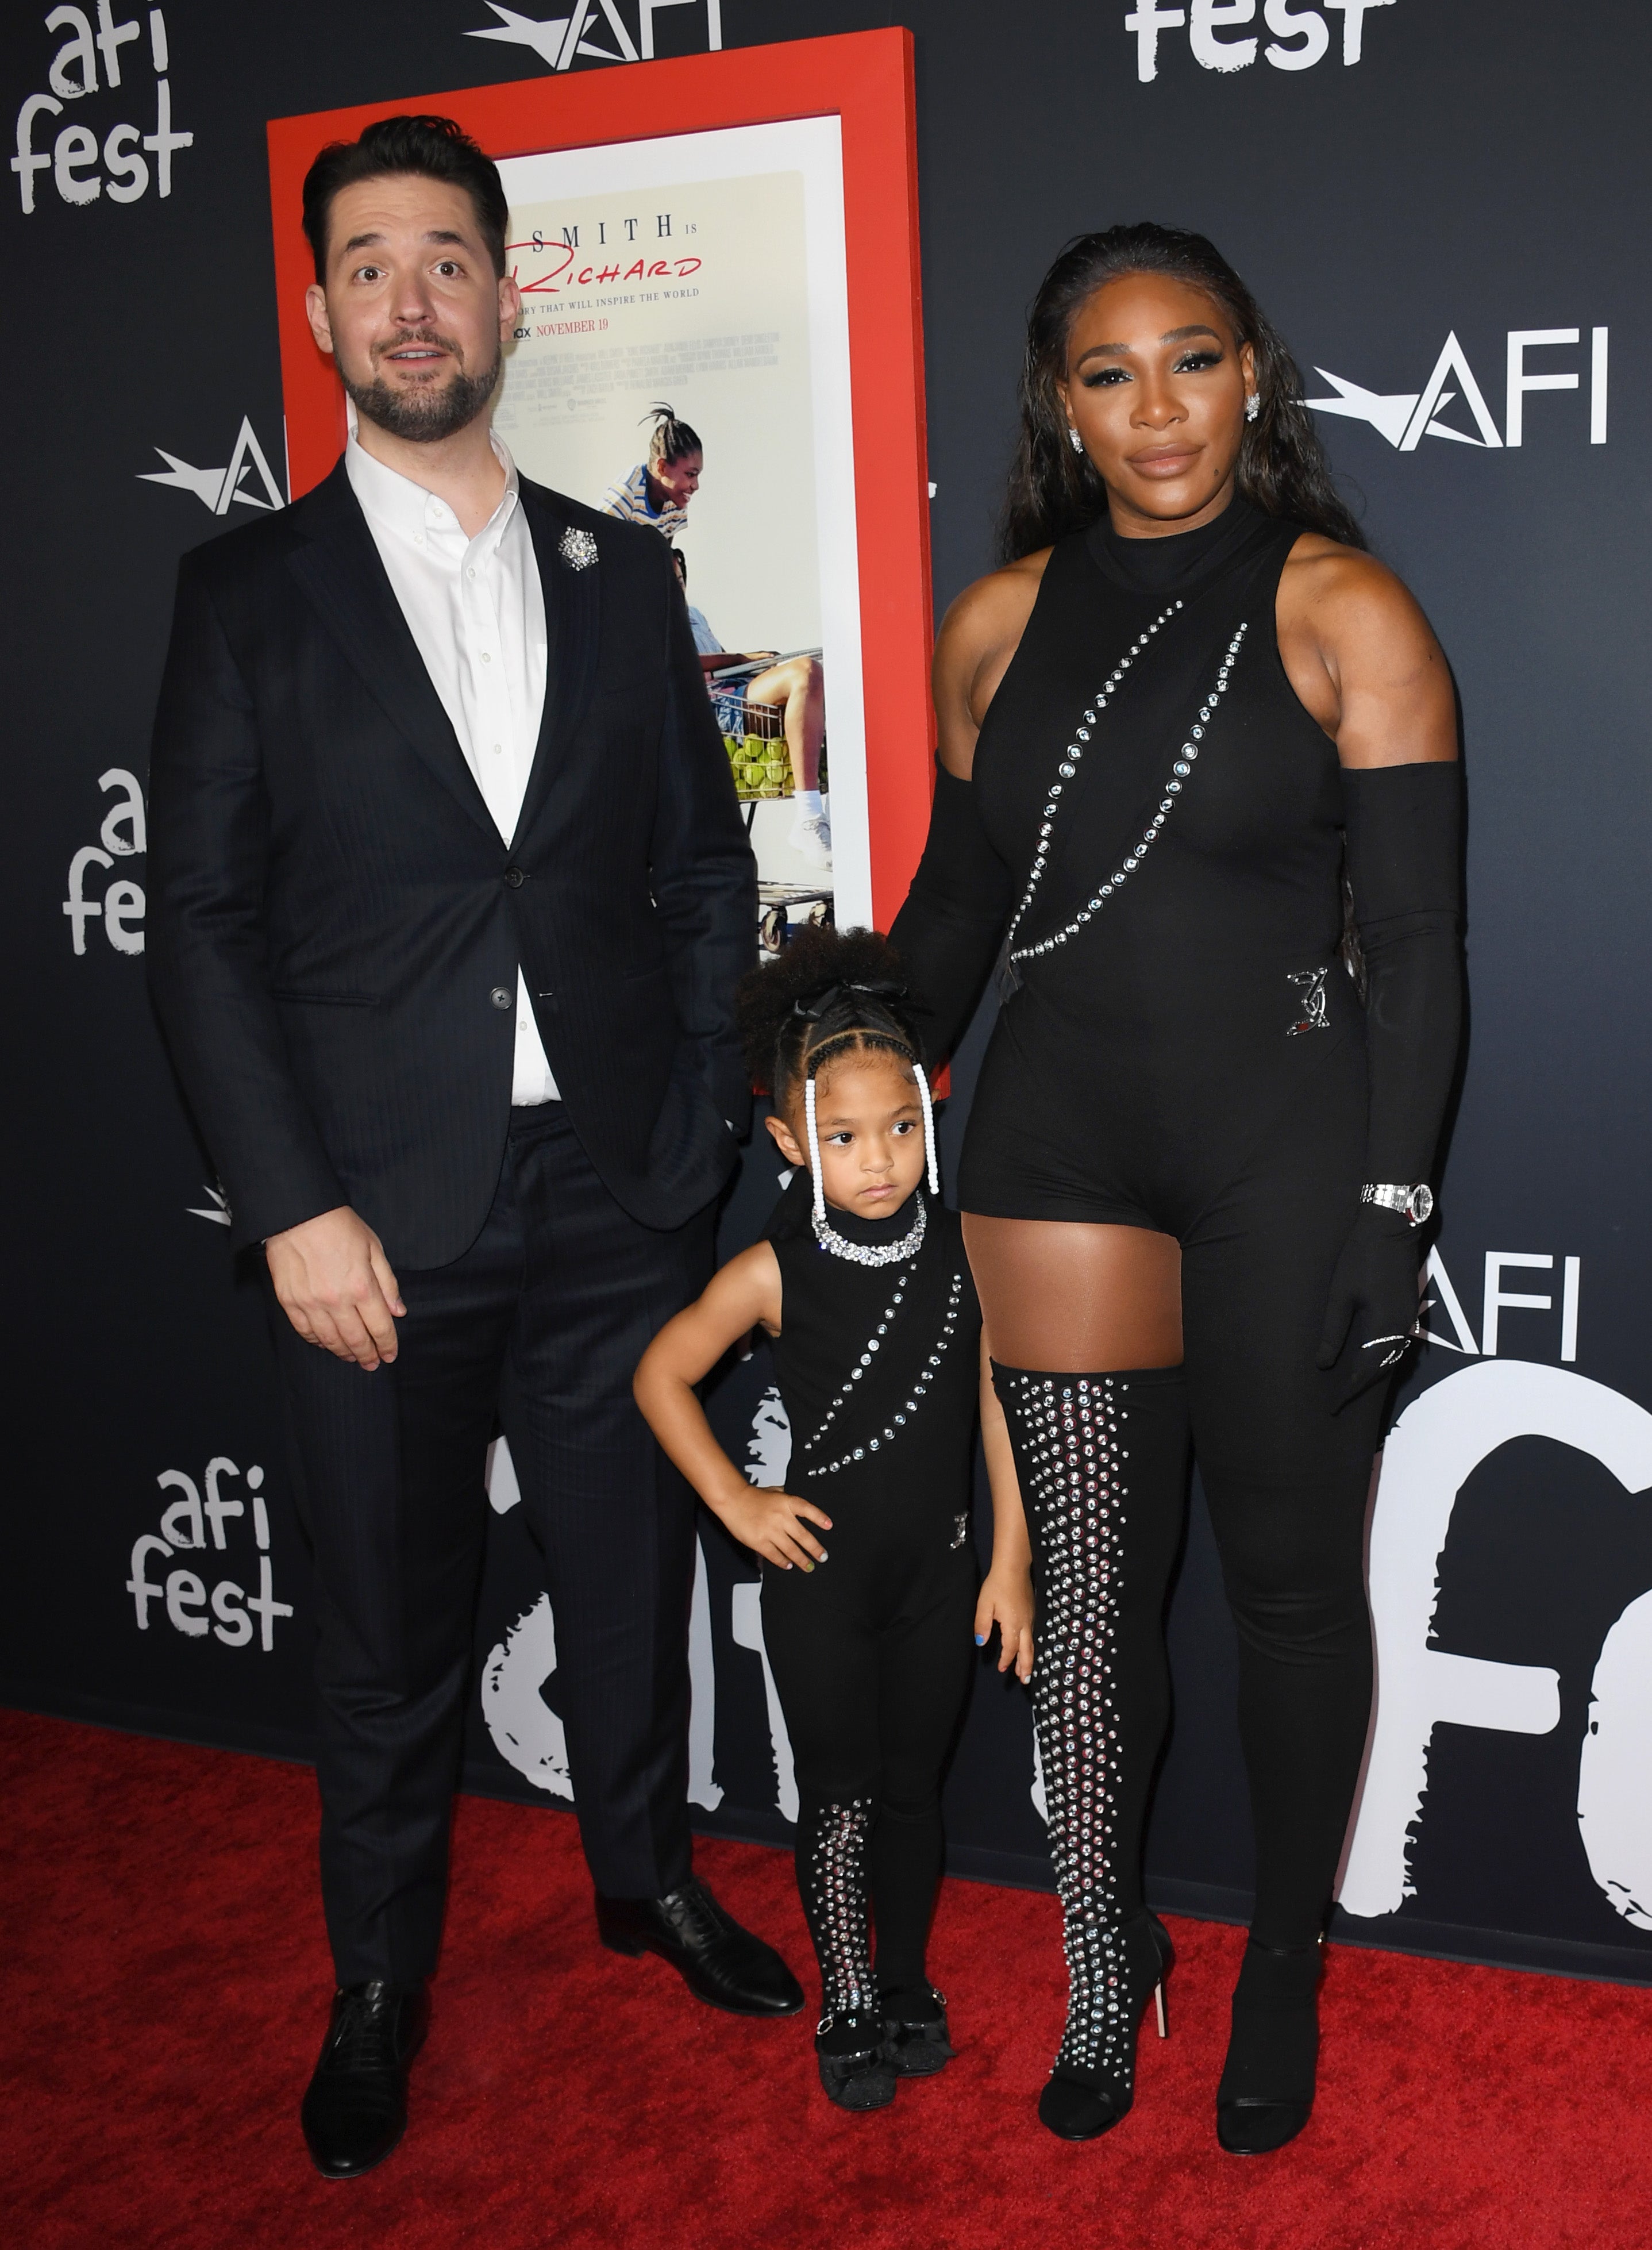 Alexis Ohanian, Olympia Ohanian Jr, and Serena Williams attend the 2021 AFI Fest: Closing Night Premiere Of Warner Bros. "King Richard" at TCL Chinese Theatre on November 14, 2021